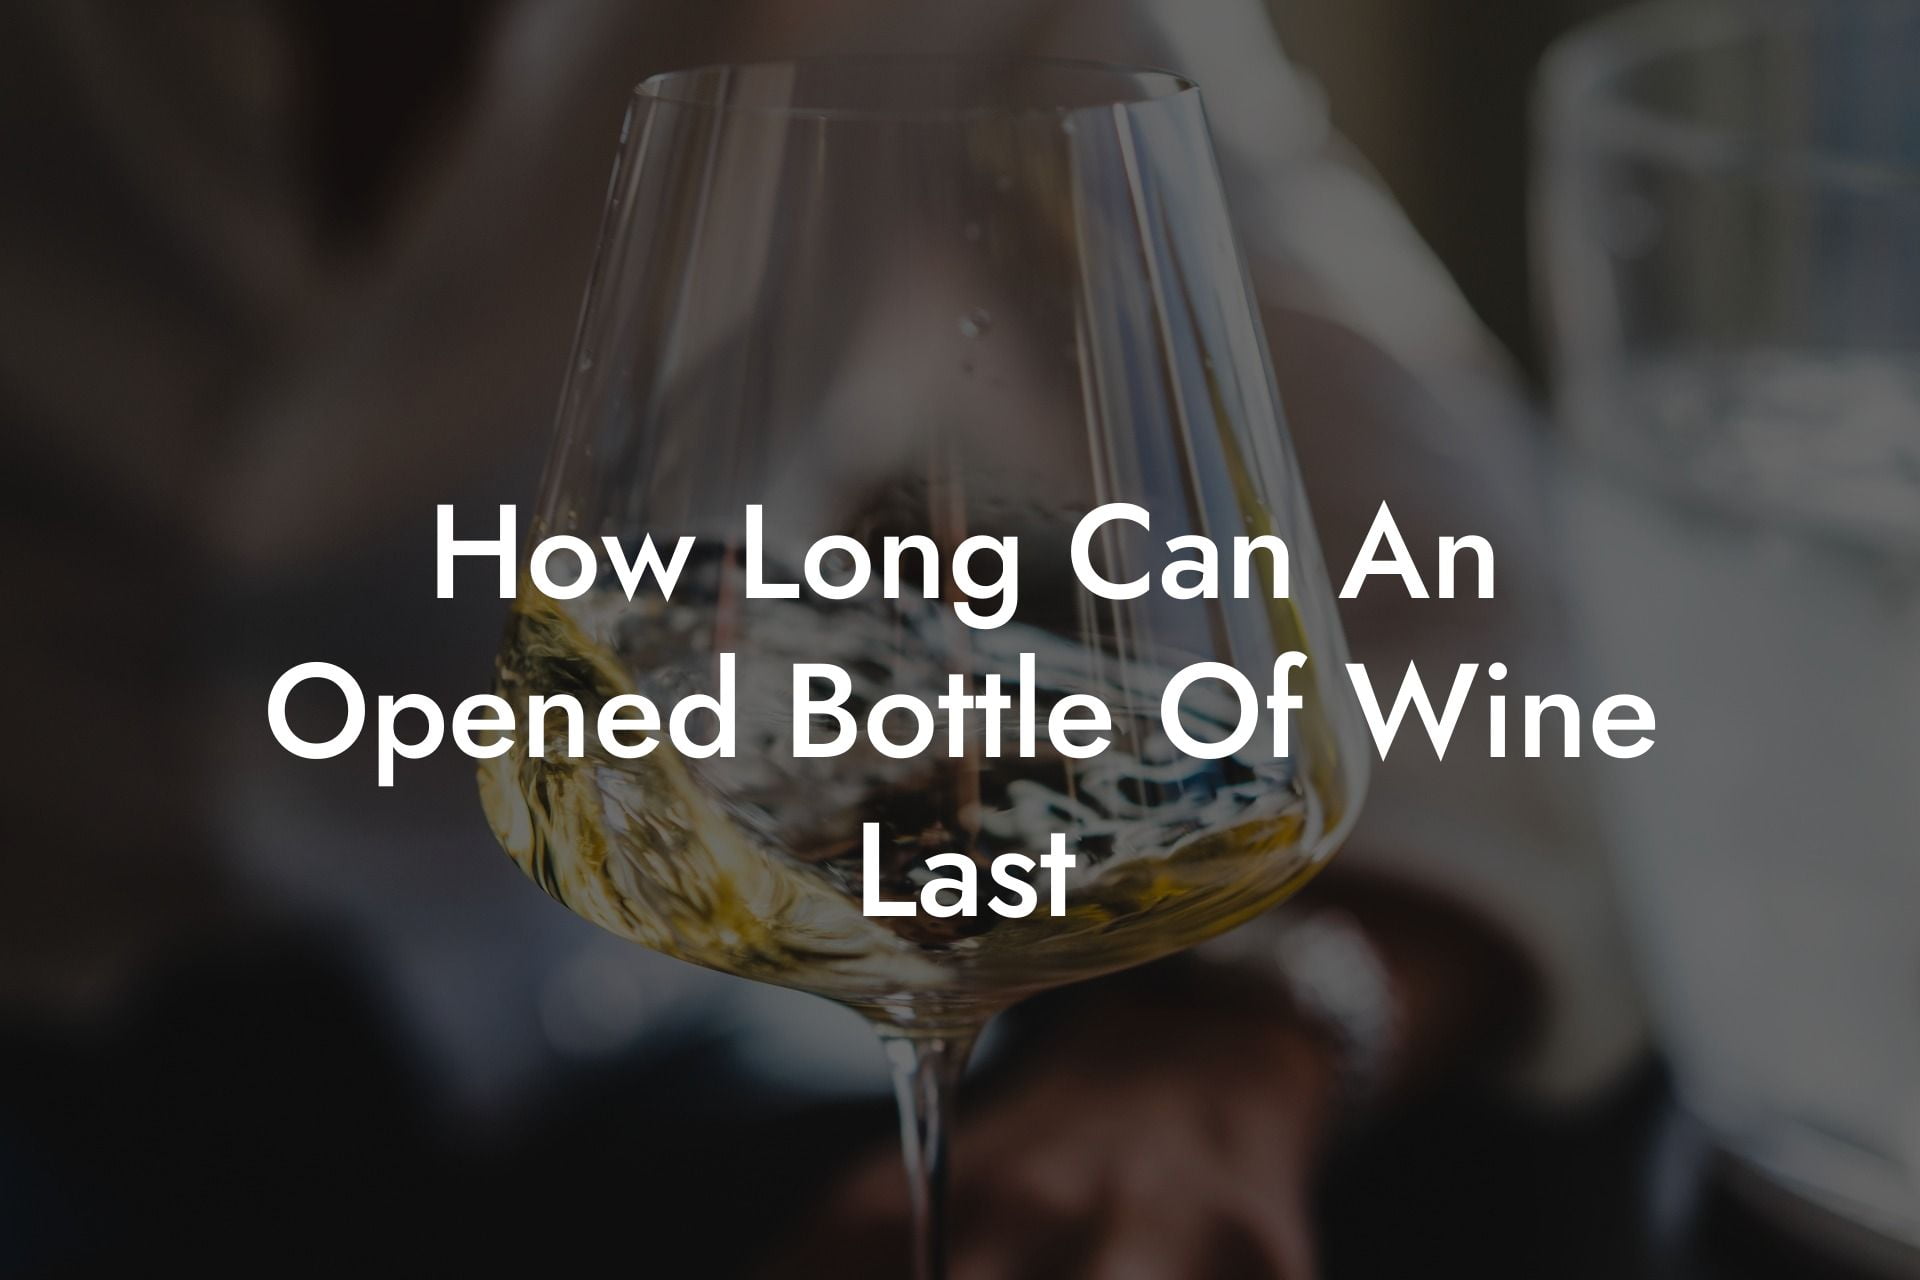 How Long Can An Opened Bottle Of Wine Last